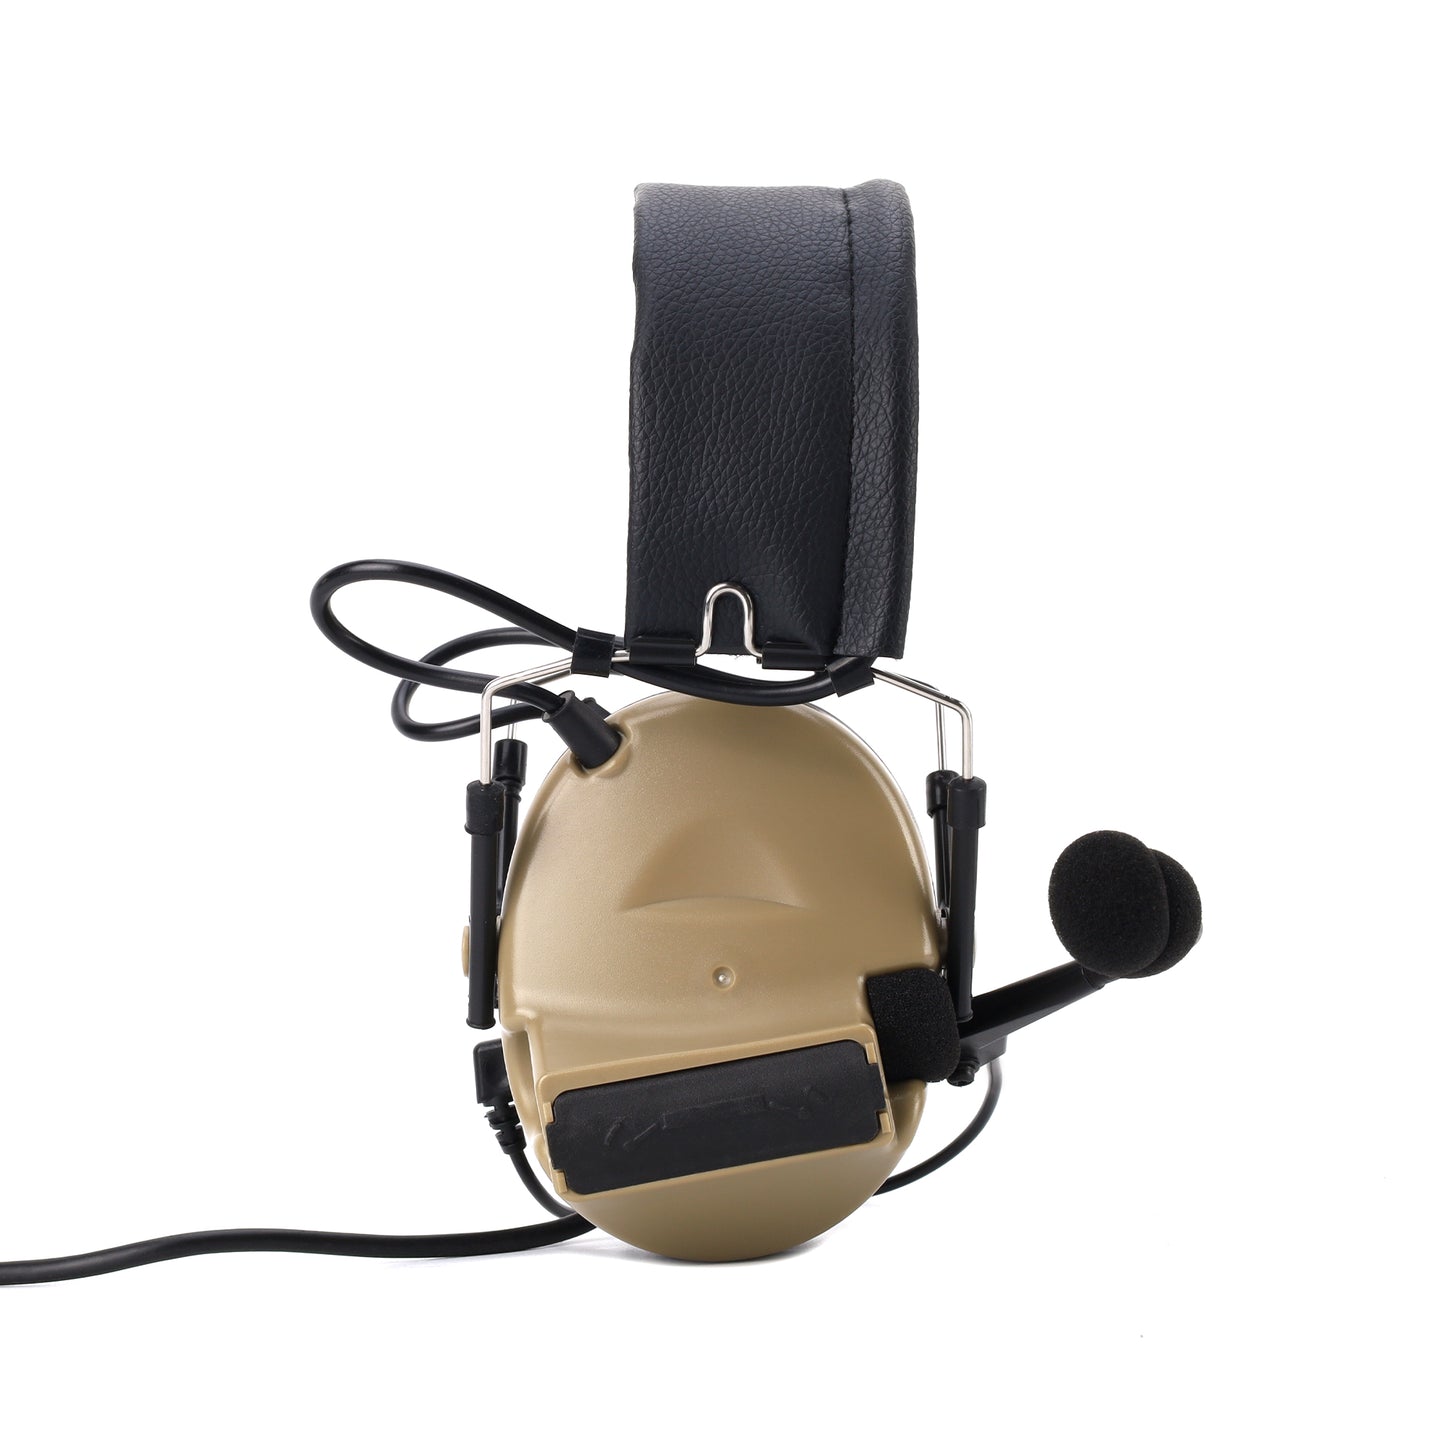 NRR 23db Electronic Hearing Protection Communications Headset